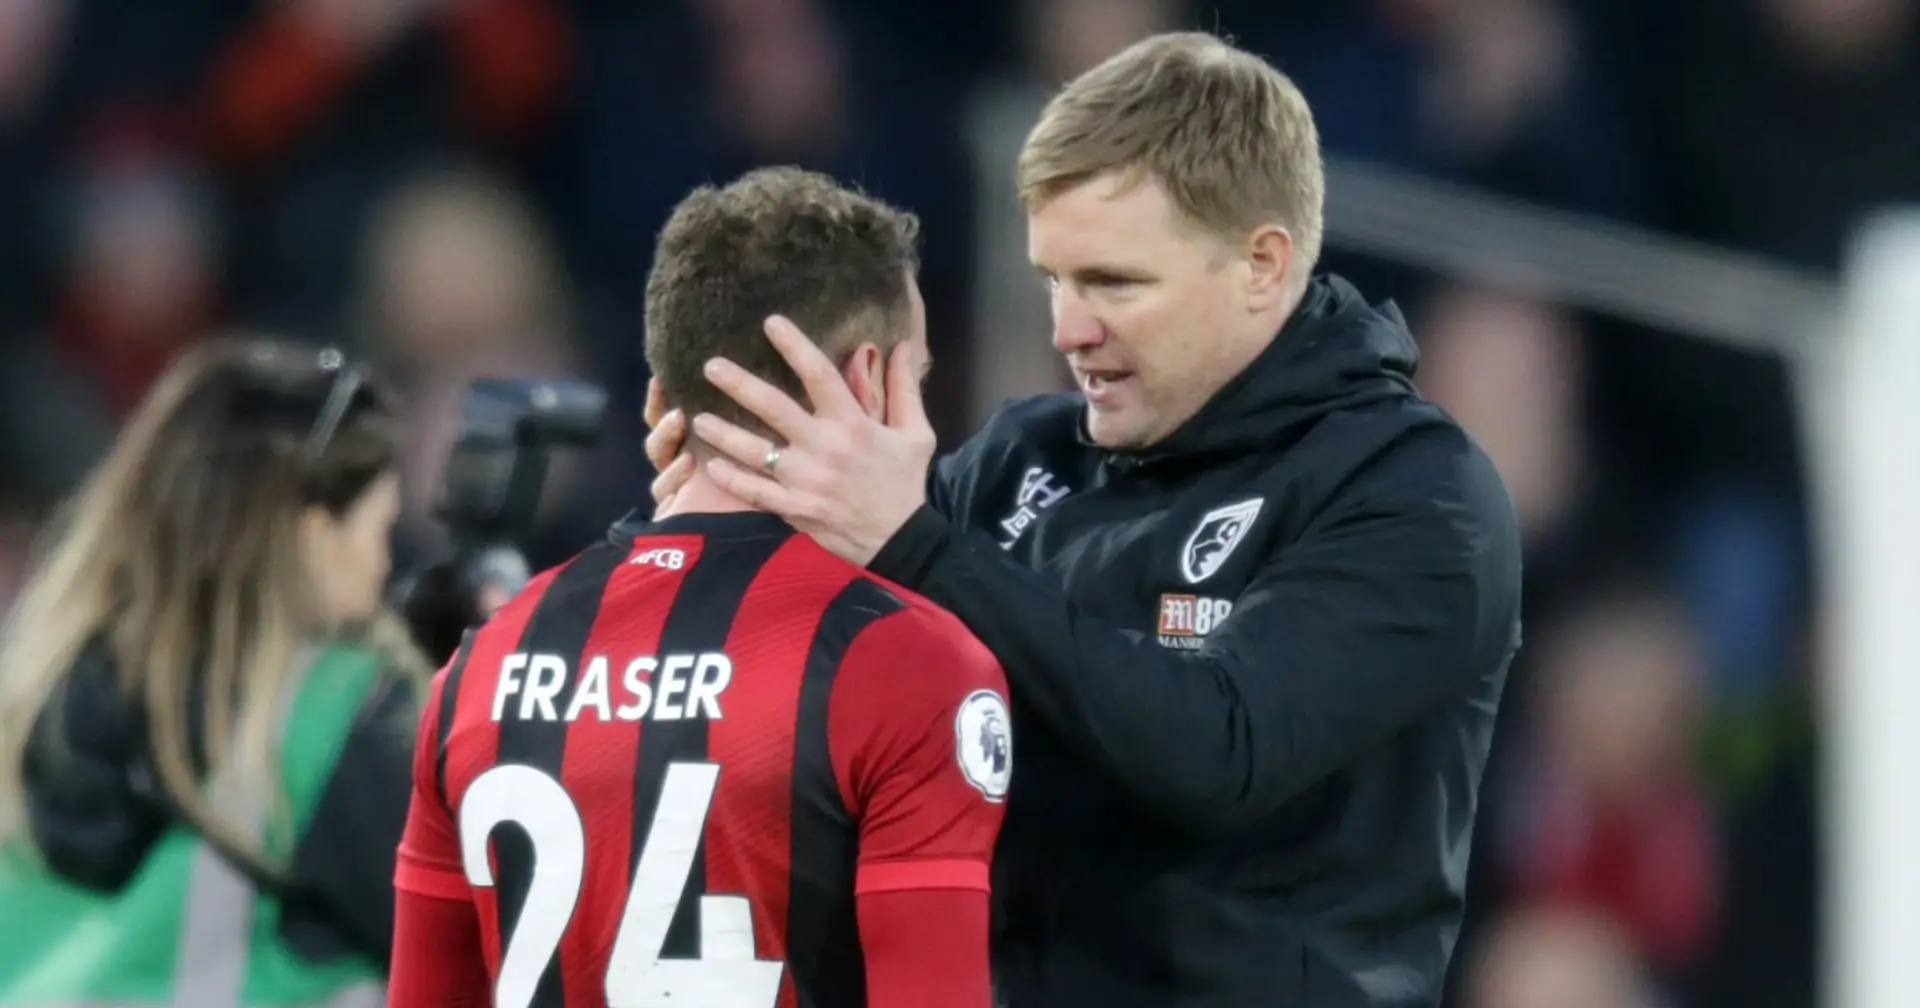 'Fraser has played his last game for the club': Eddie Howe confirms the winger's imminent exit